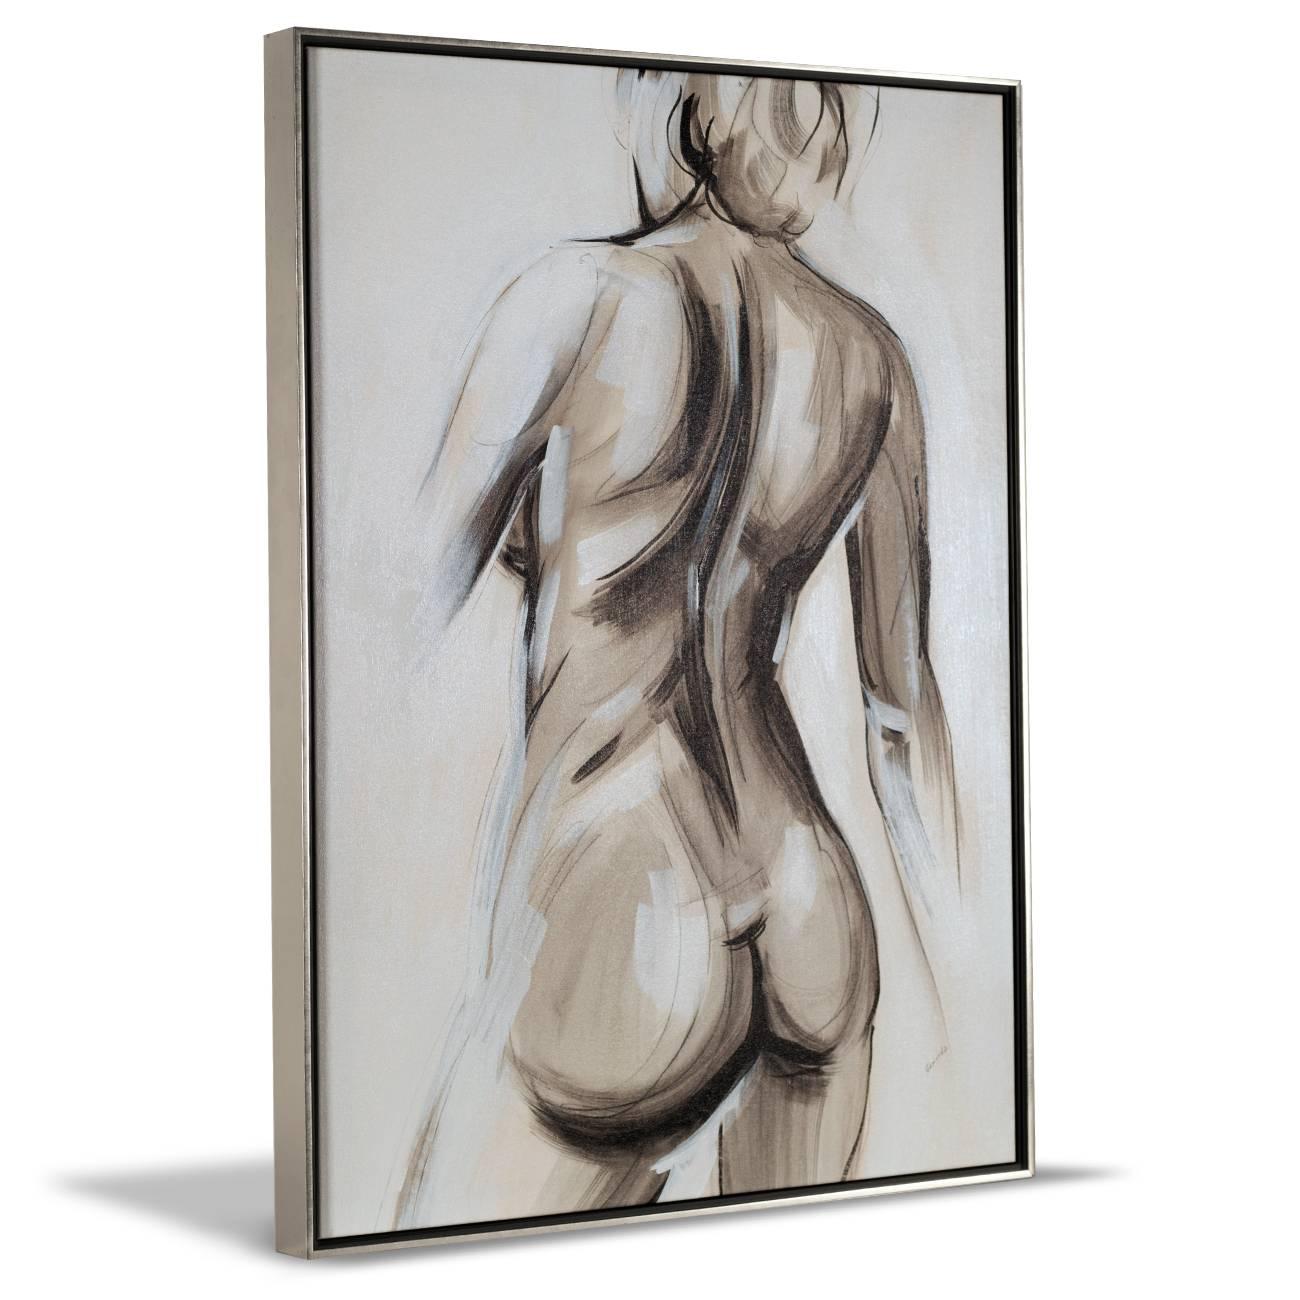 **GALLERY MOVING SALE PRICE** Soft brush strokes in a range of neutral tones form the sensual female figures in Sydney Edmunds' 2-piece "Contemporary Nude" series. Each painting is 40 inches tall and 30 inches wide. Shown in silver floater frame,